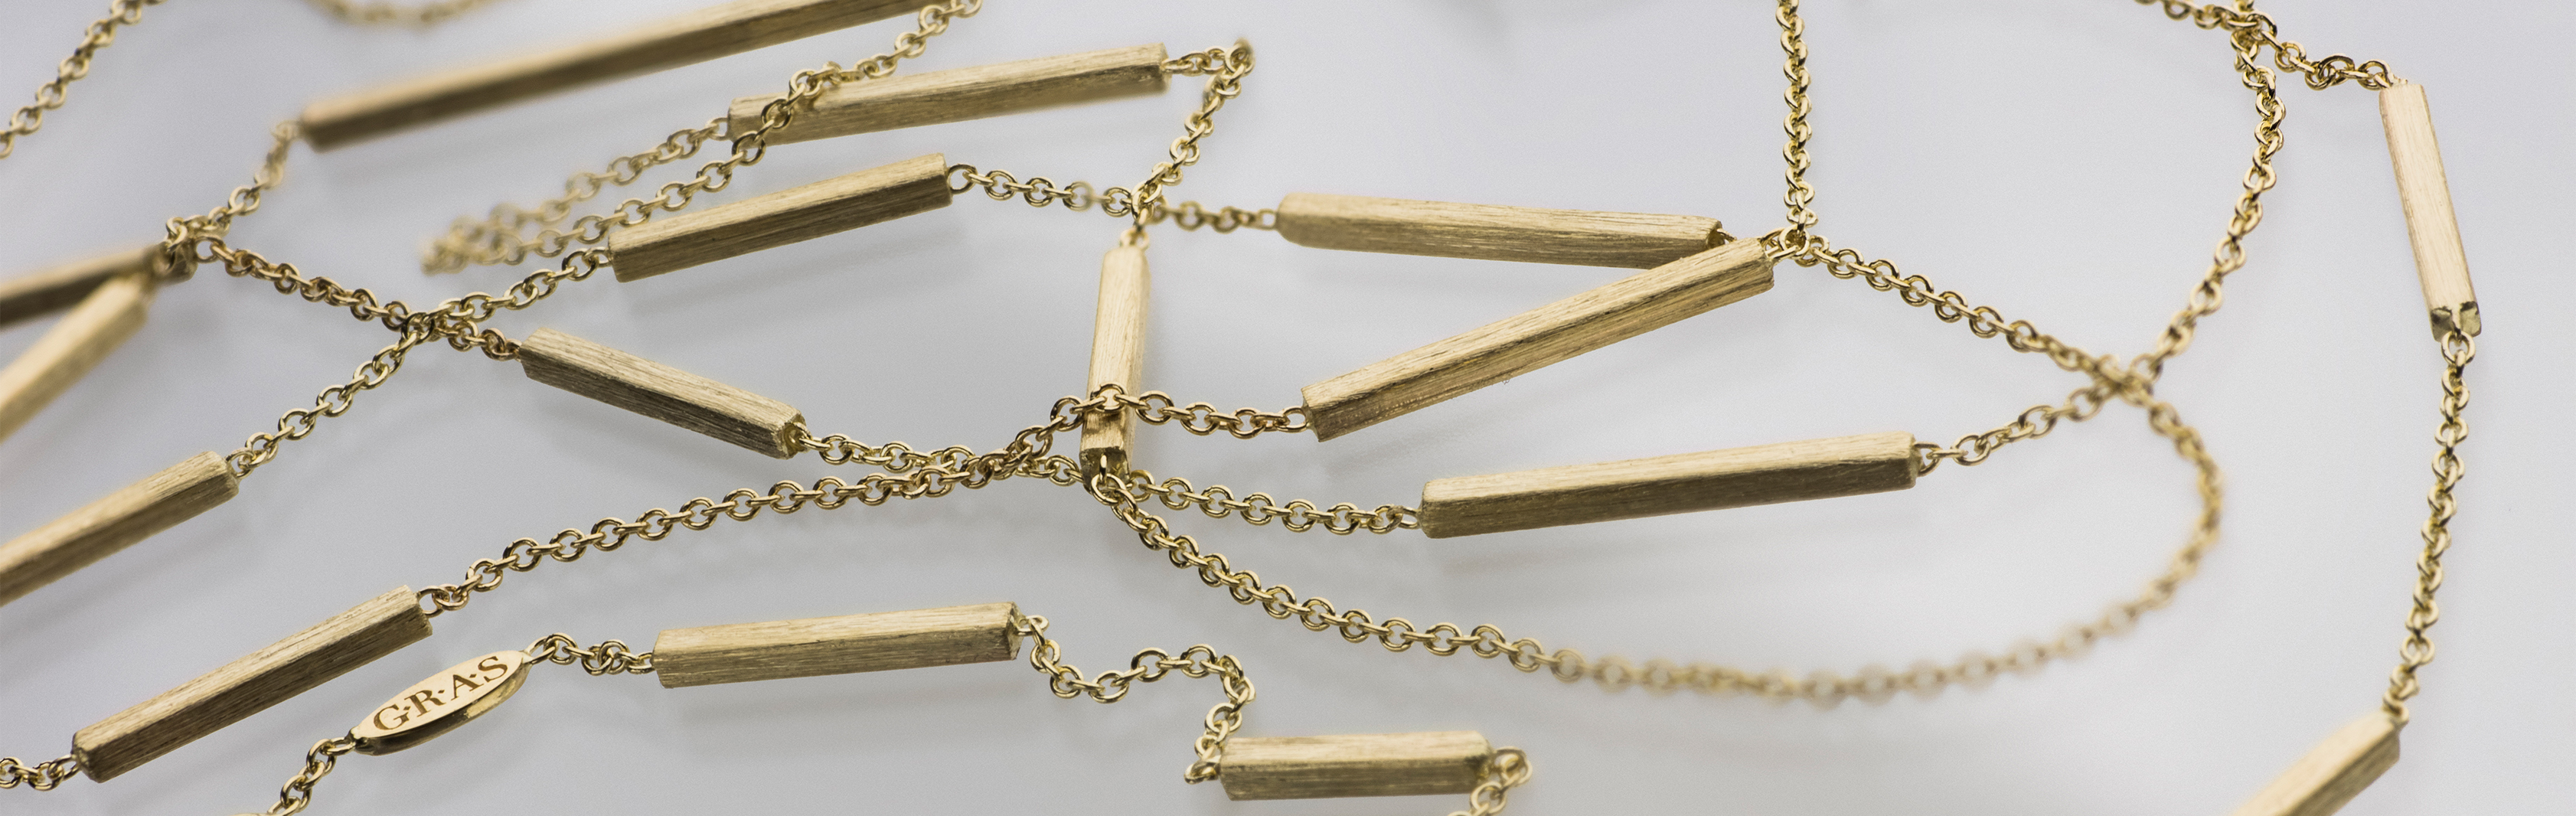 Golden Rods Collection | 14K Matte Gold Jewelry